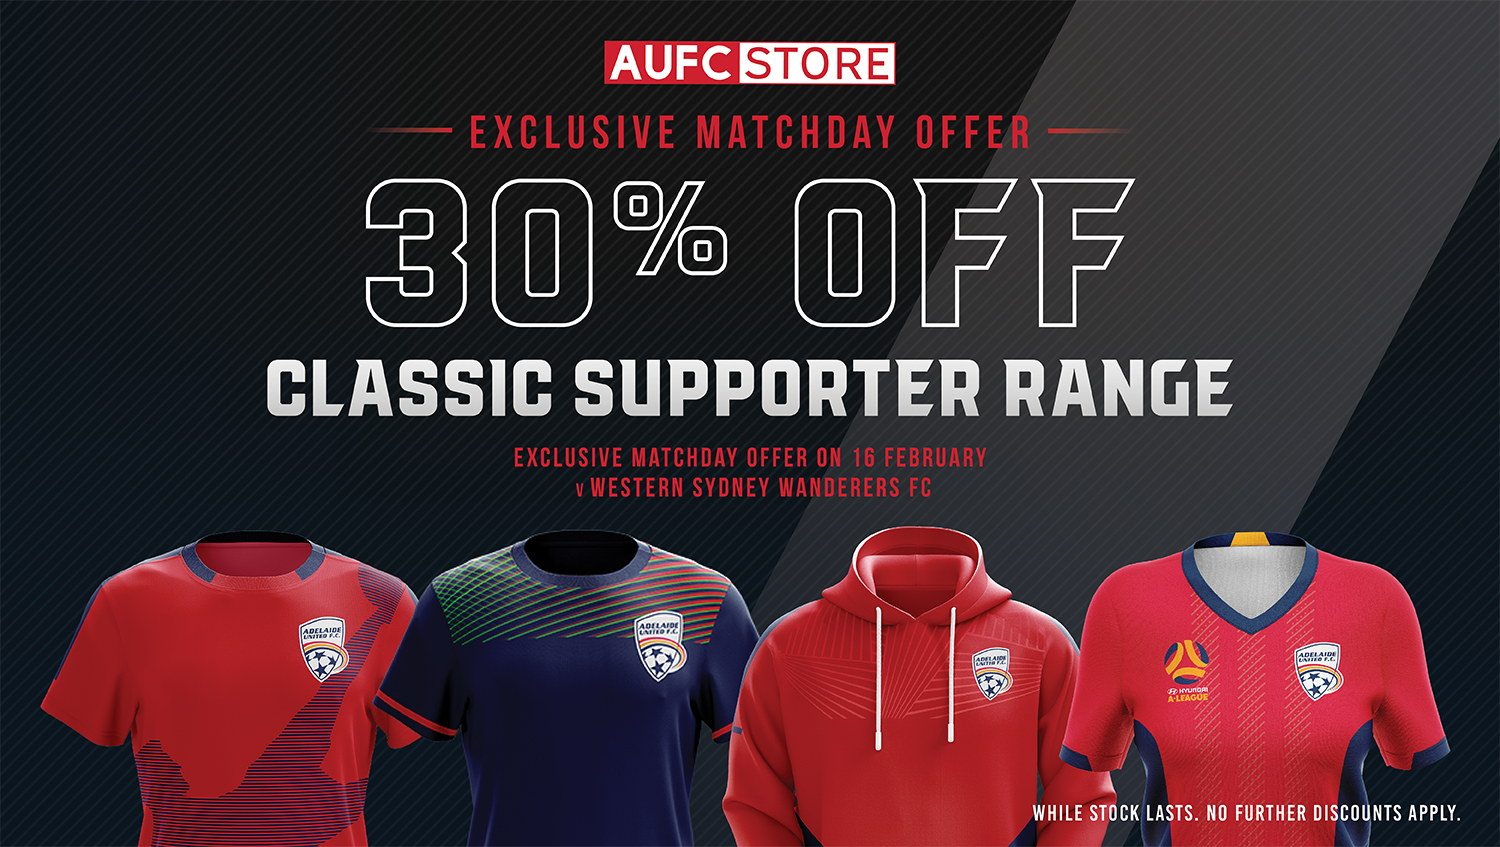 Adelaide United 30% off classic supporter range matchday offer